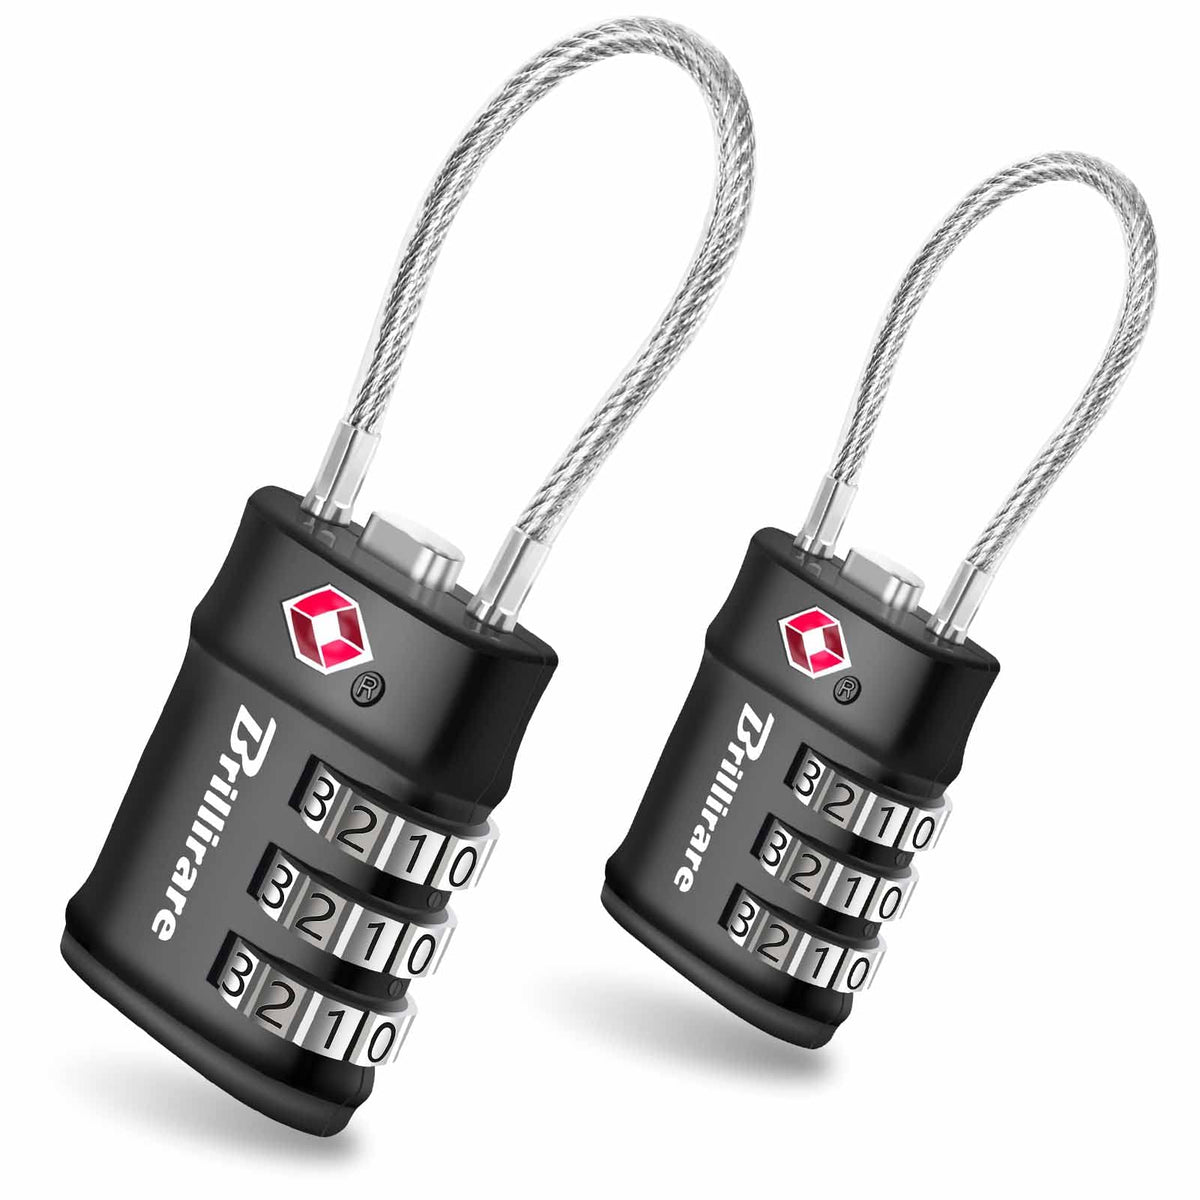 2 Pack TSA Approved Luggage Locks, Combination Travel Cable Lock, 3-Digit Waterproof Padlock, Zinc Alloy Outdoor Keyless Resettable Lock for Travel, Lockers, Bags, Backpack, Gym, Gate-by Brillirare